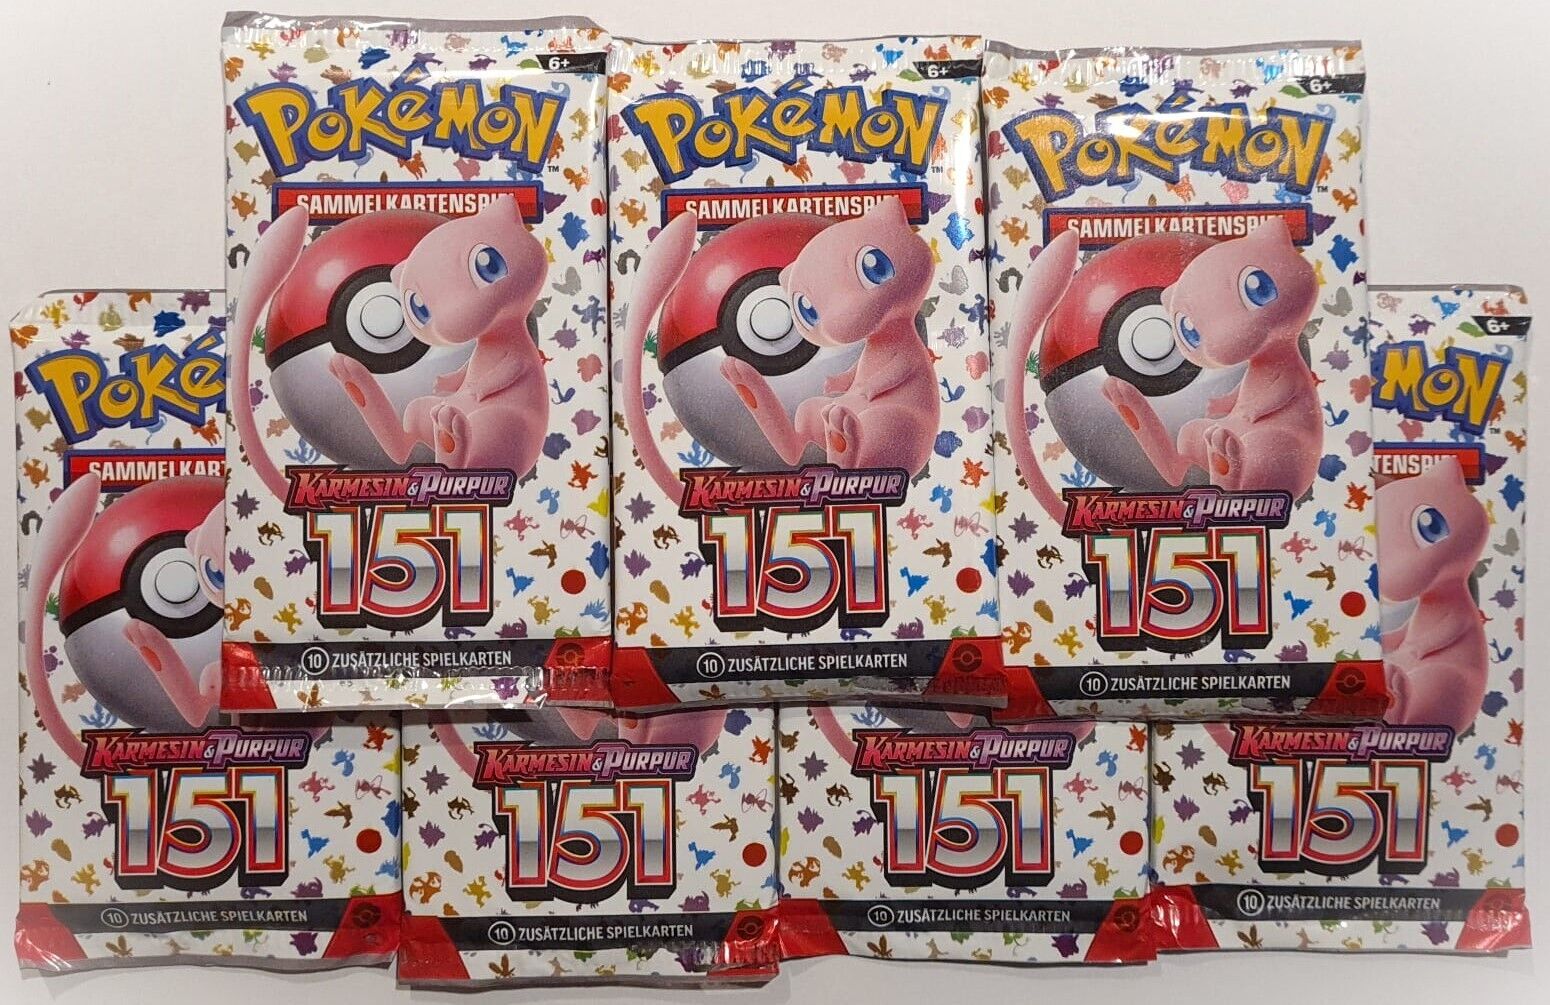 1x Pokemon Karmesin & Purple 151 REPACKED Booster Pack (DE) with 20% Big HIT CHANCE